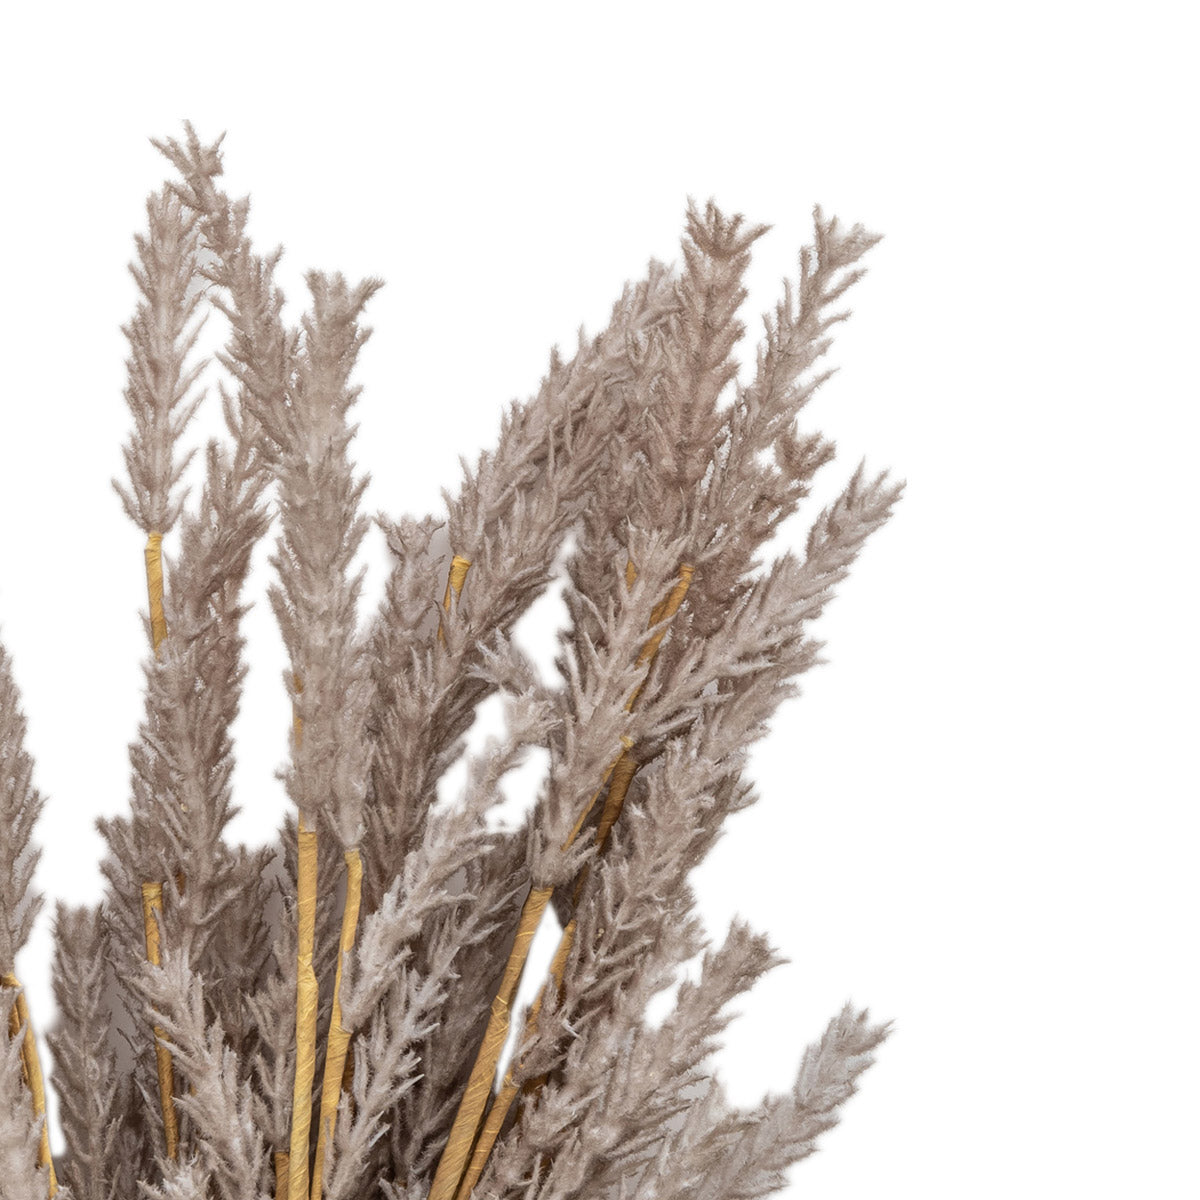 Artificial Dried Moleskin Pampas Grass Bunch of 9 Stems– Click Style